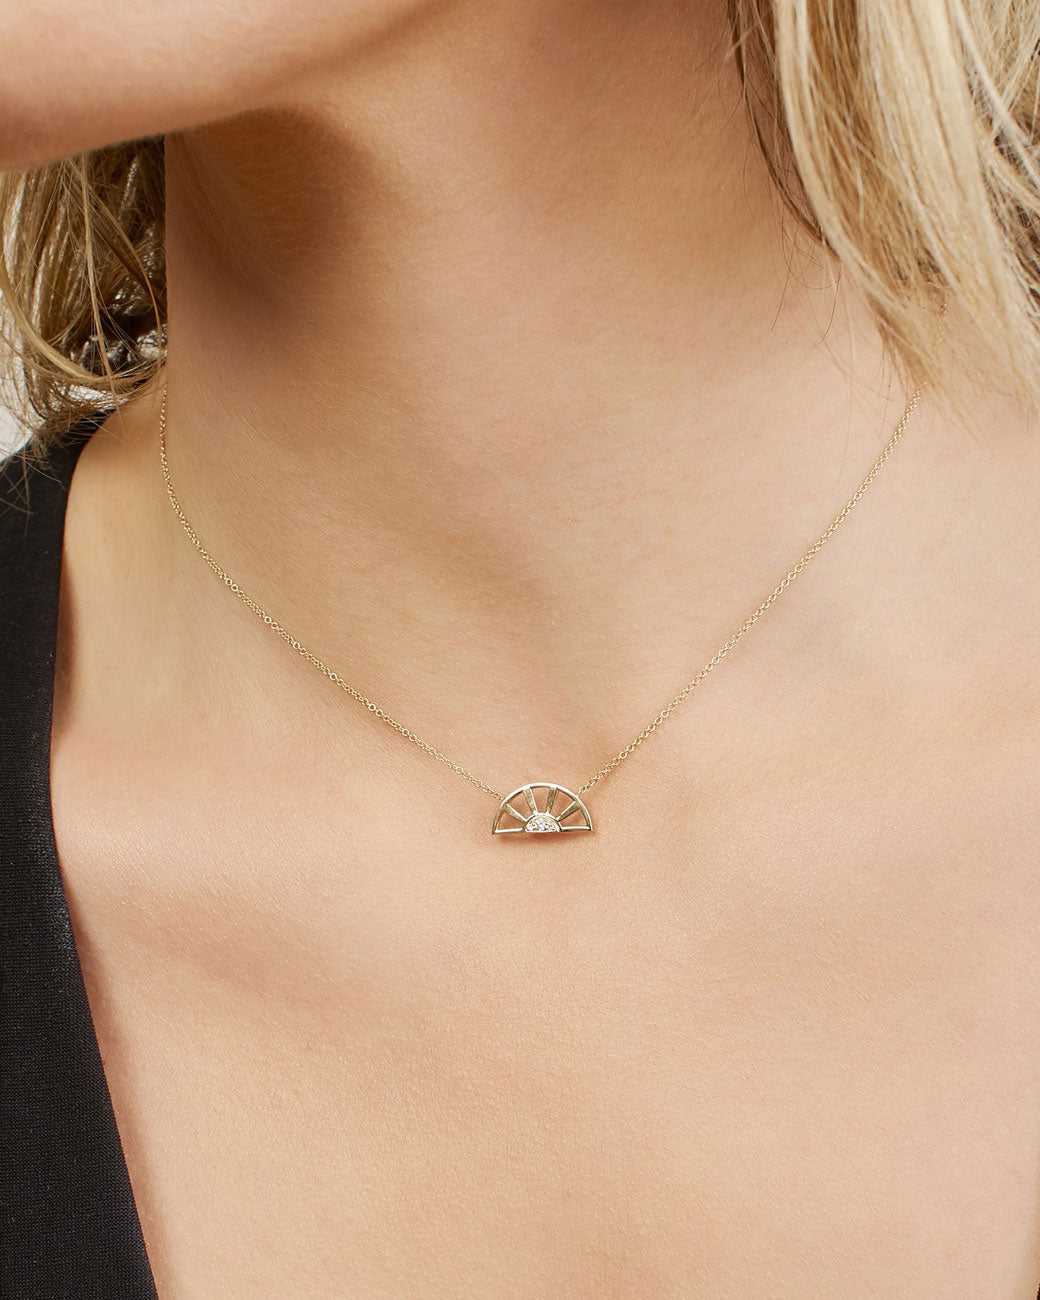 Designed to look like a sunset, this pendant necklace features three white diamonds set at the center of a yellow gold sun.